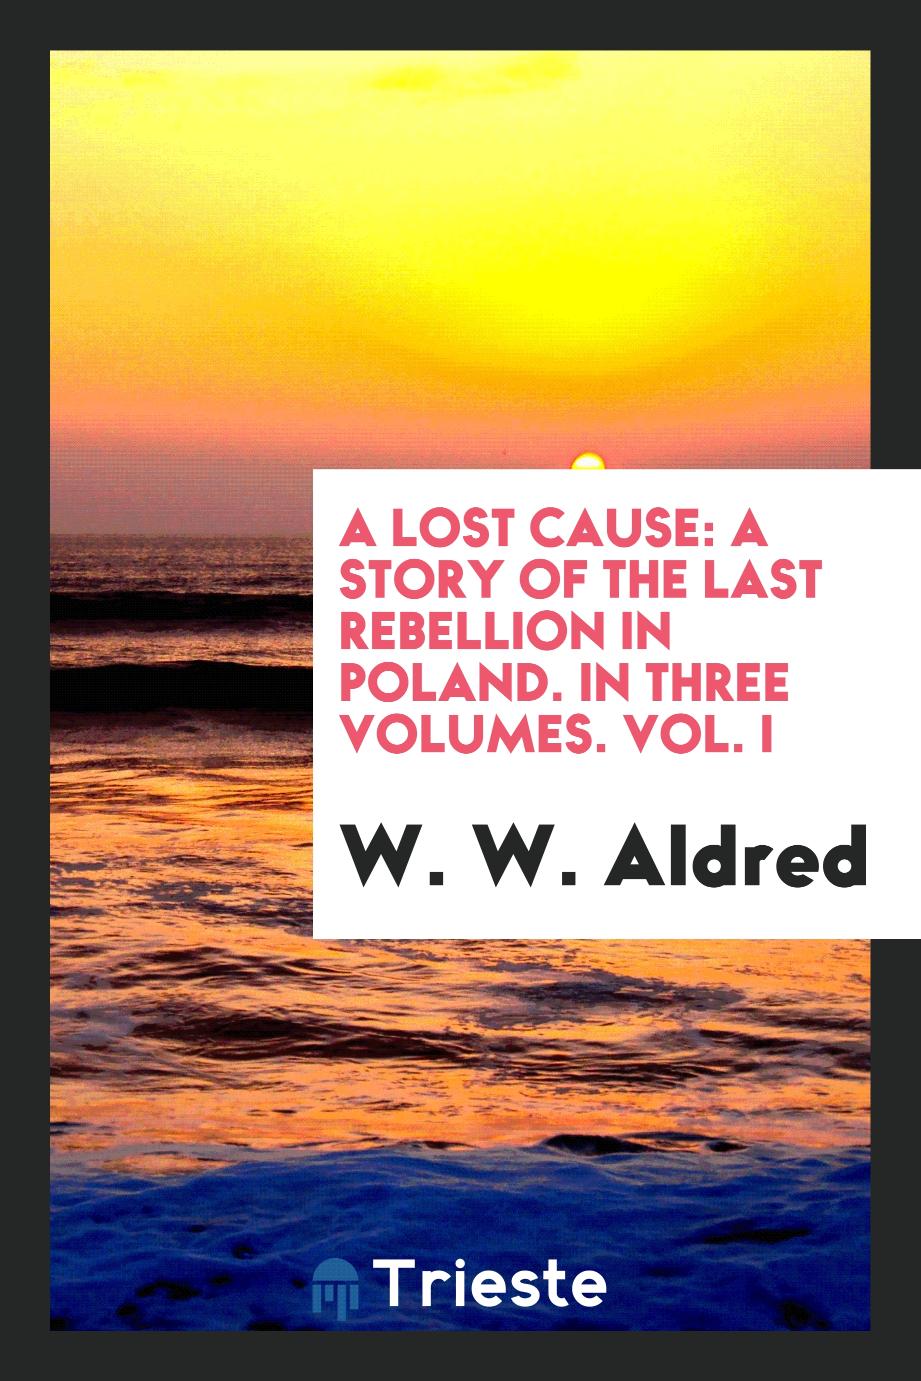 A Lost Cause: a Story of the Last Rebellion in Poland. In Three Volumes. Vol. I